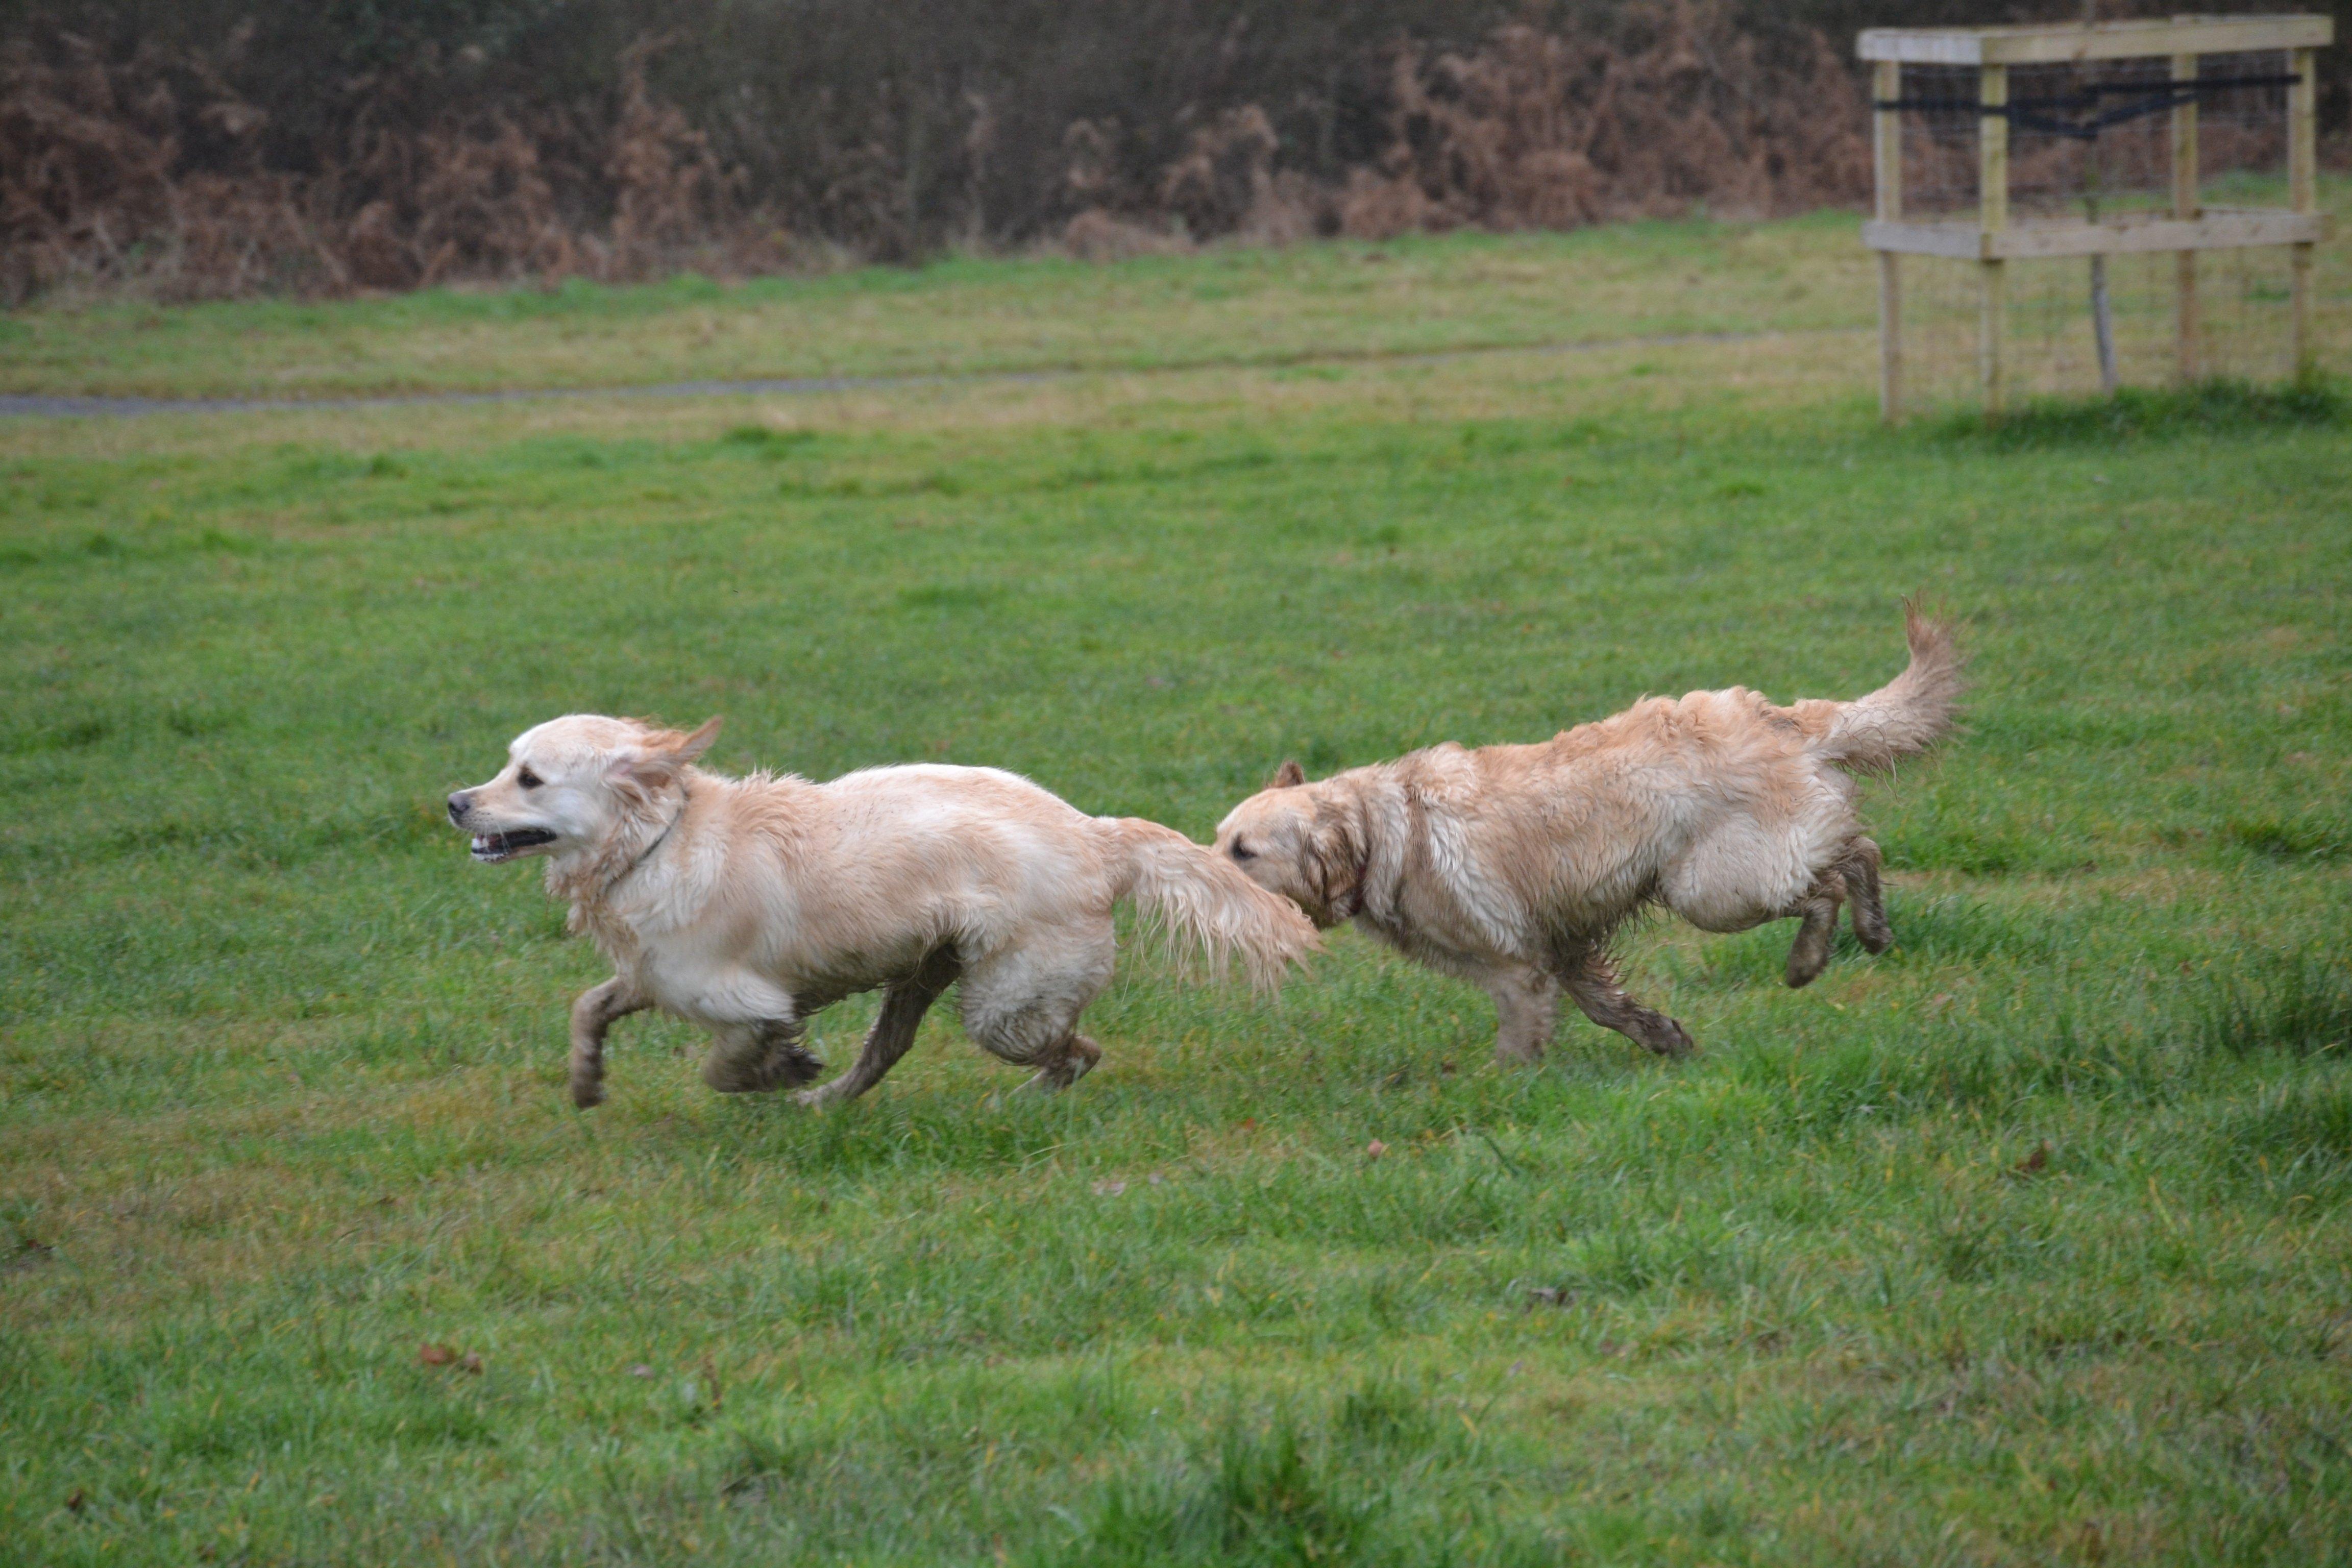 Two golden retrievers chase each other at the Kent and Sussex Golden Retrievers meet-up, photo courtesy of Millie Goad